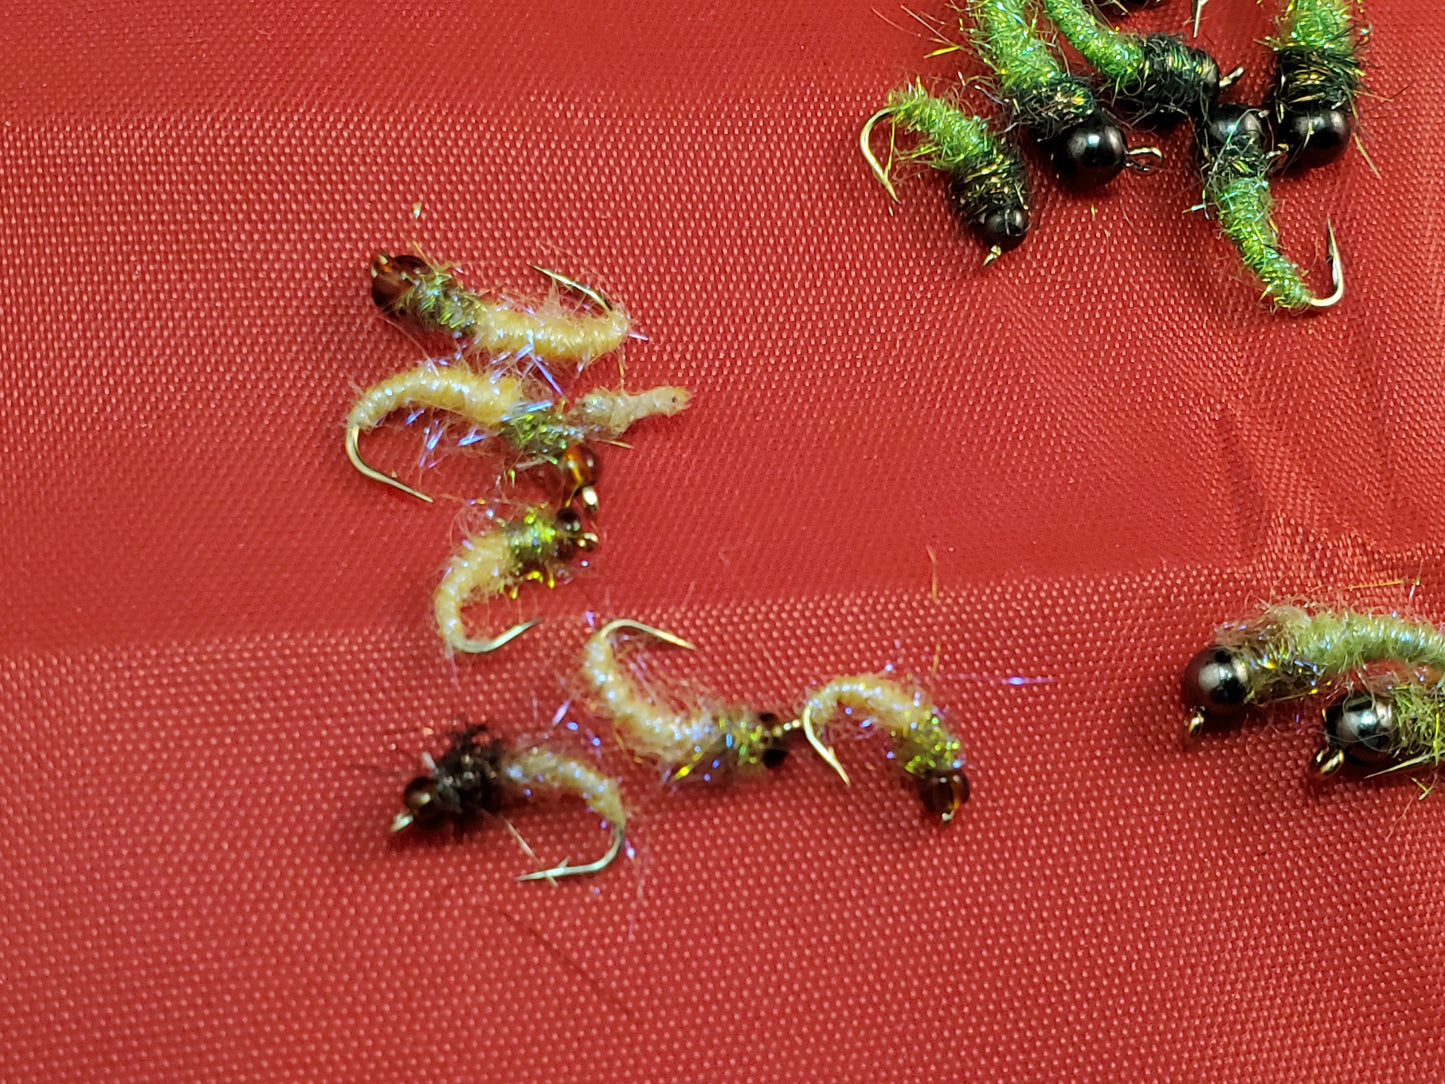 40  Ken's Ice Caddis, Ice Caddis Pupa, Caddis Pupa, Caddis Nymph 40 FLY SELECTION